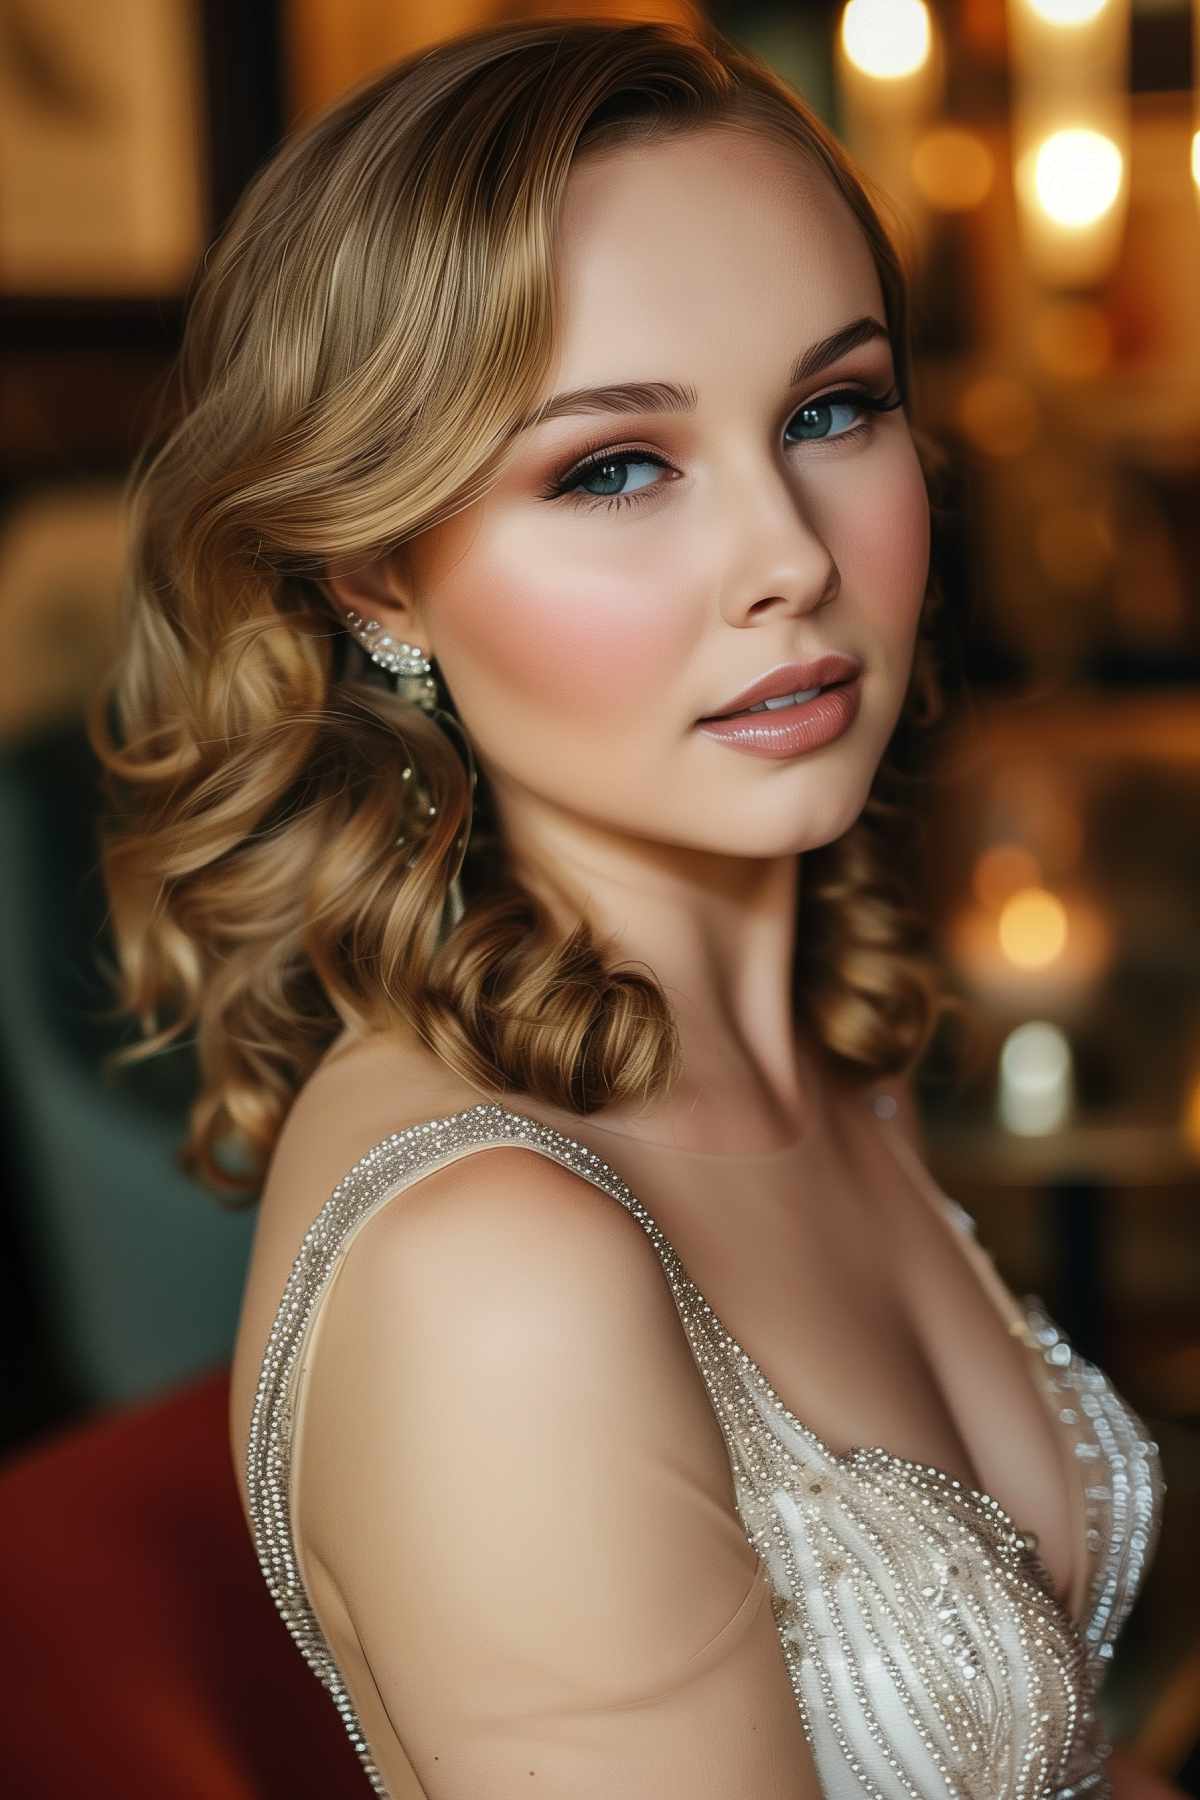 Elegant woman with retro waves styled in a side sweep, enhancing her classic glamour look in an ornate setting.